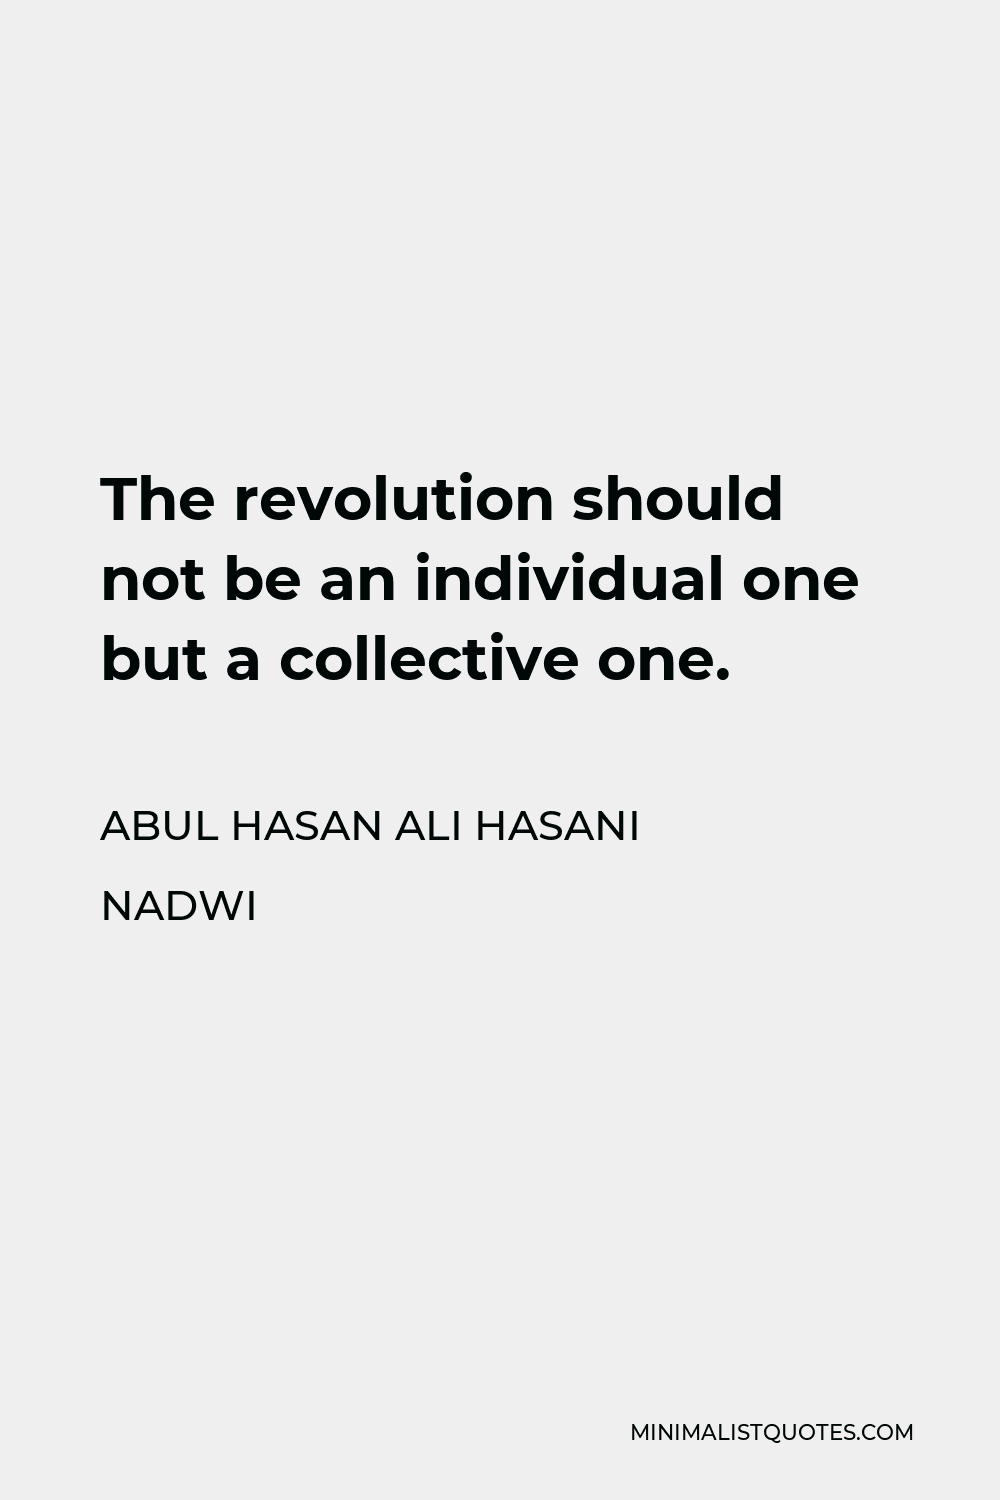 Abul Hasan Ali Hasani Nadwi Quote - The revolution should not be an individual one but a collective one.